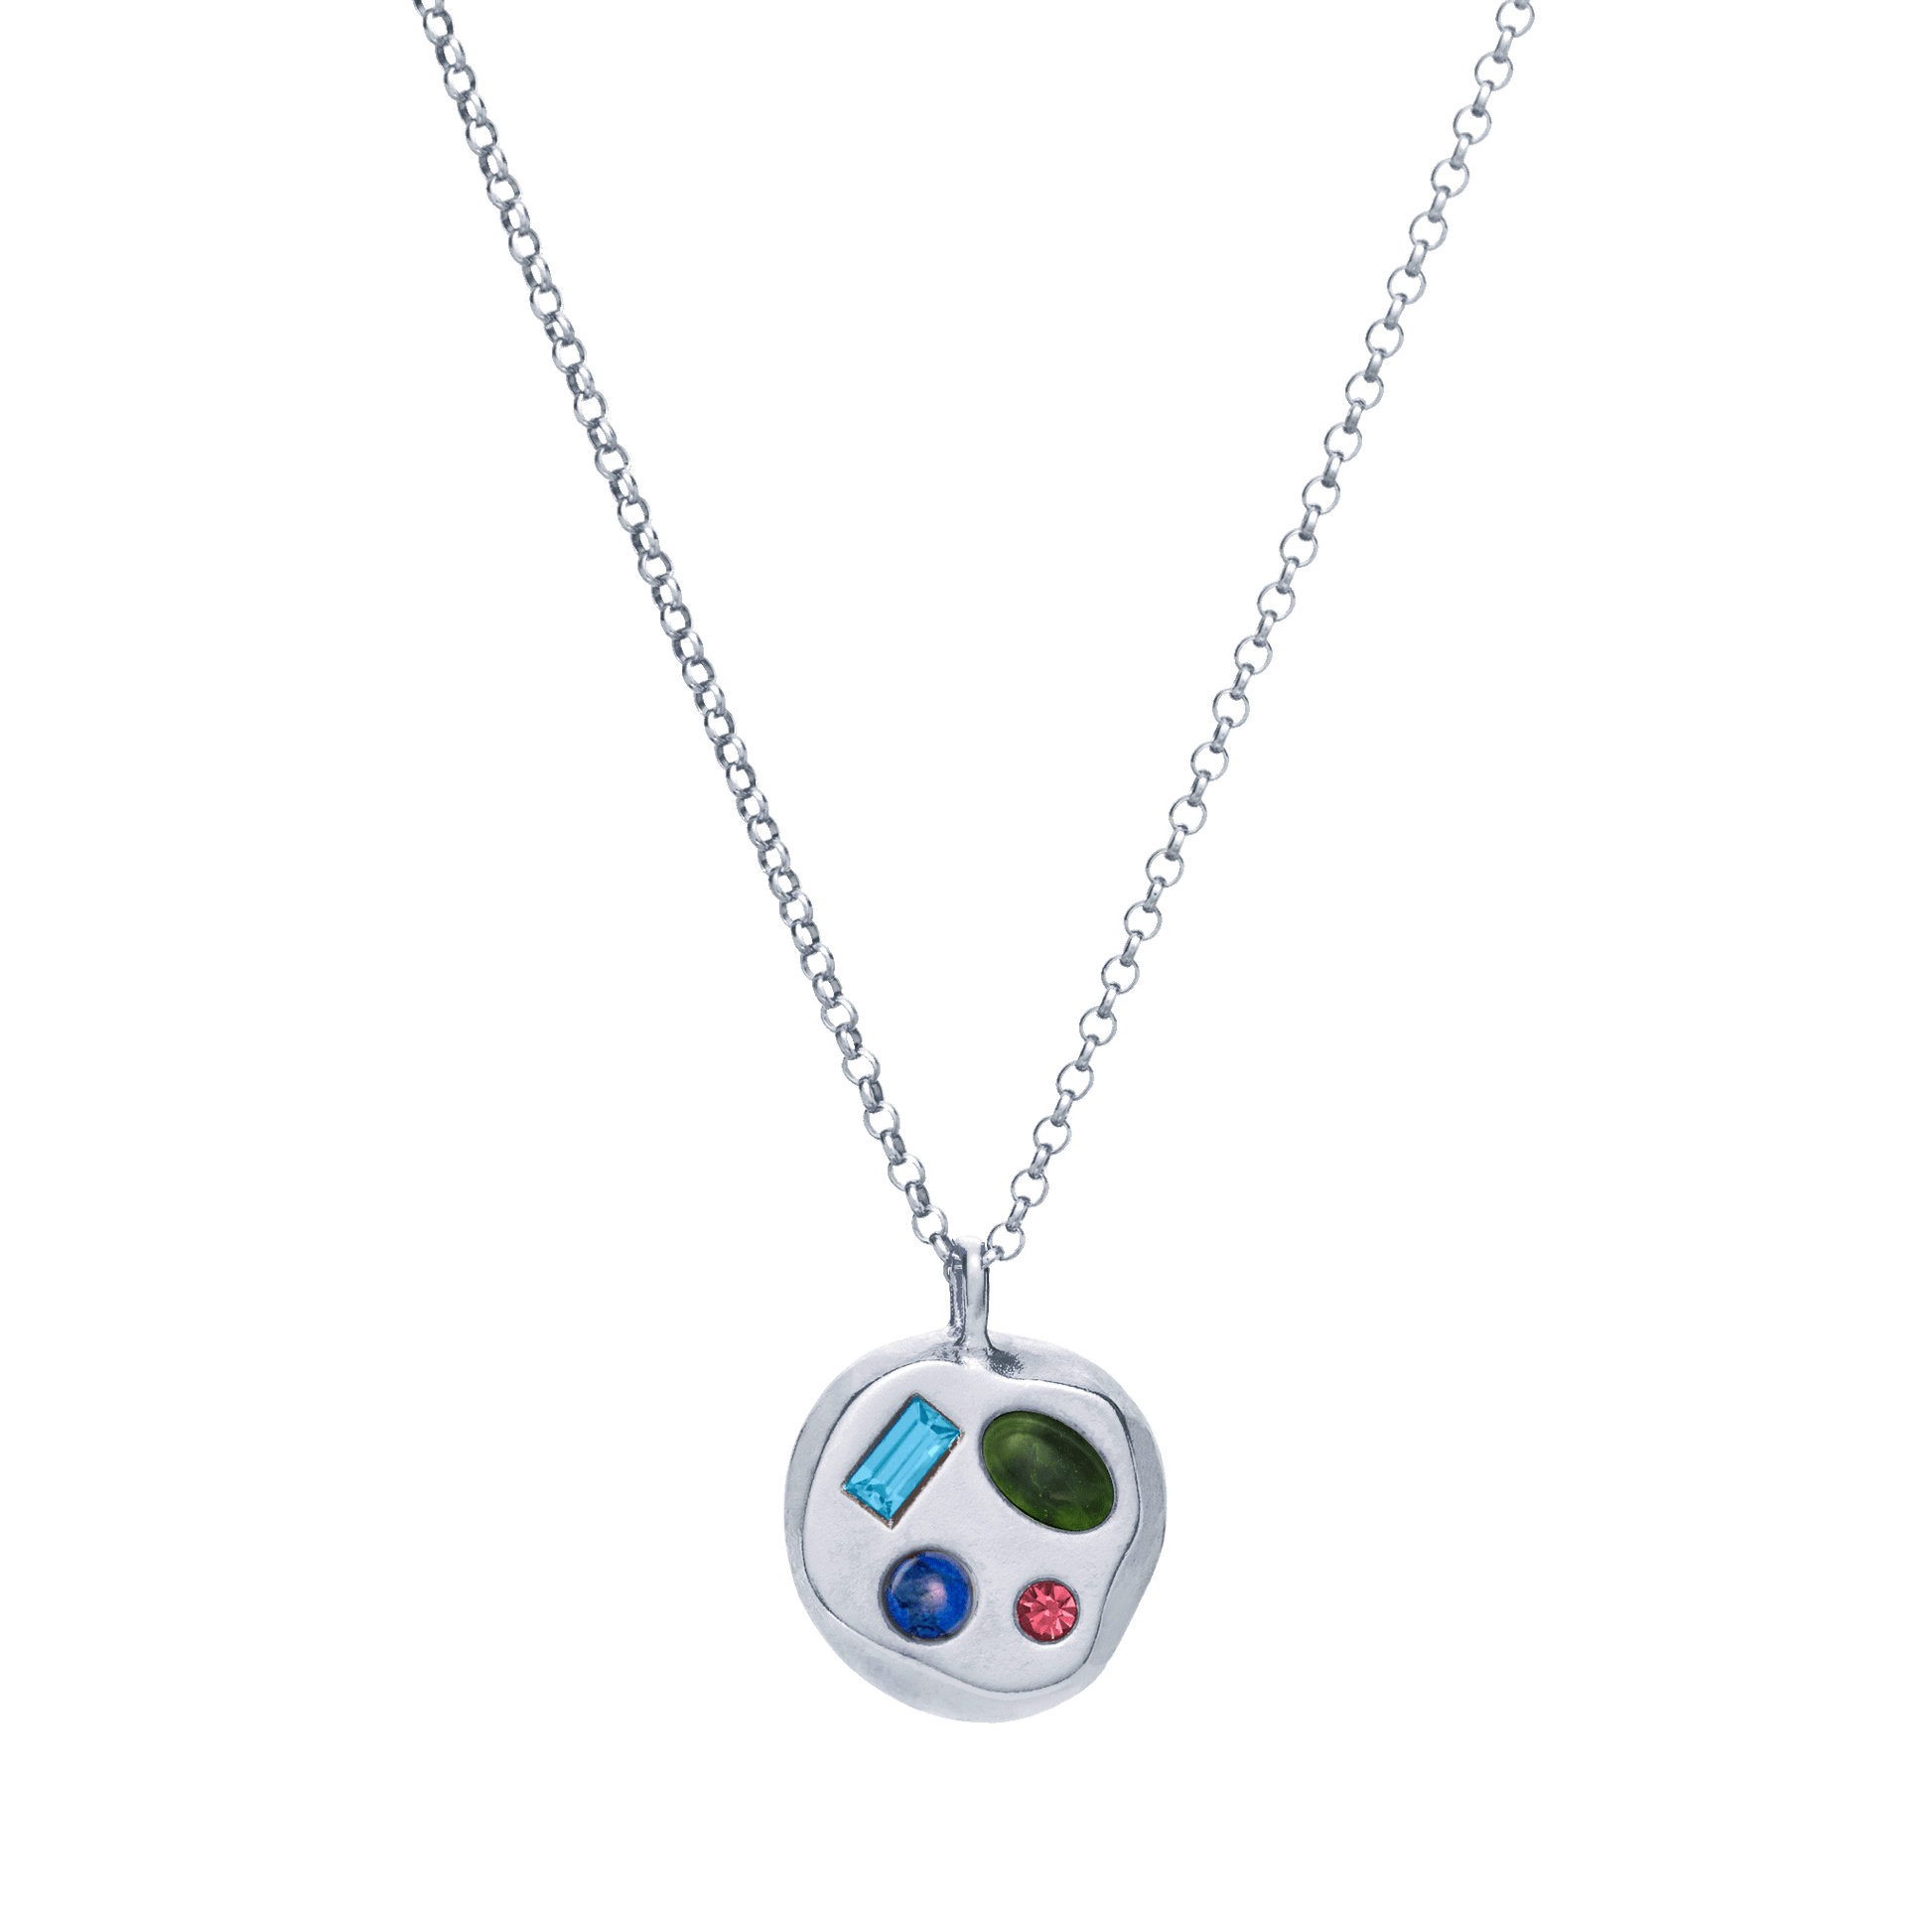 The December Twenty-Fourth Pendant in Sterling Silver